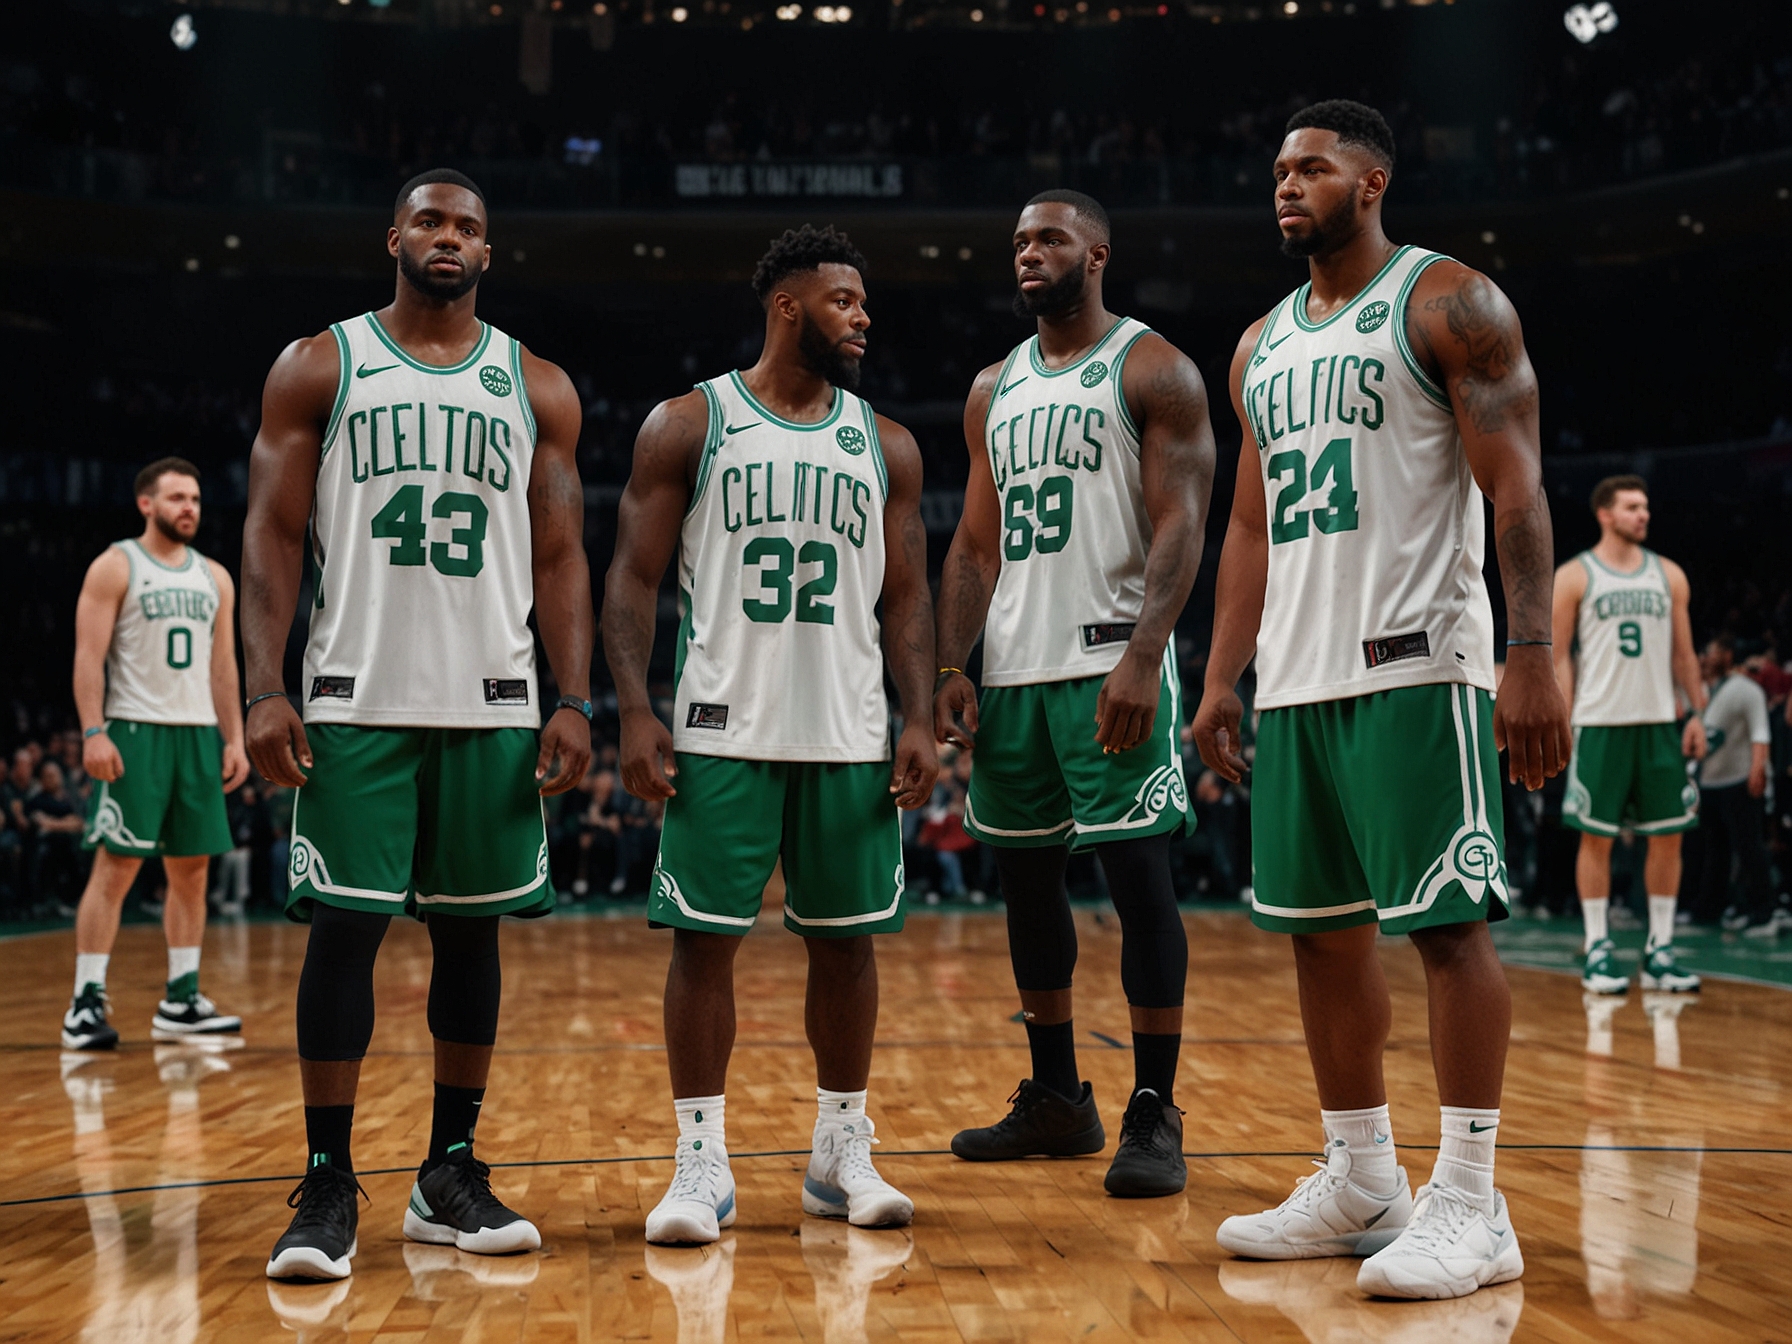 Boston Celtics players in training, supported by coaching staff, showcasing the cohesive, supportive culture that Stevens prioritizes for long-term team performance and stability.